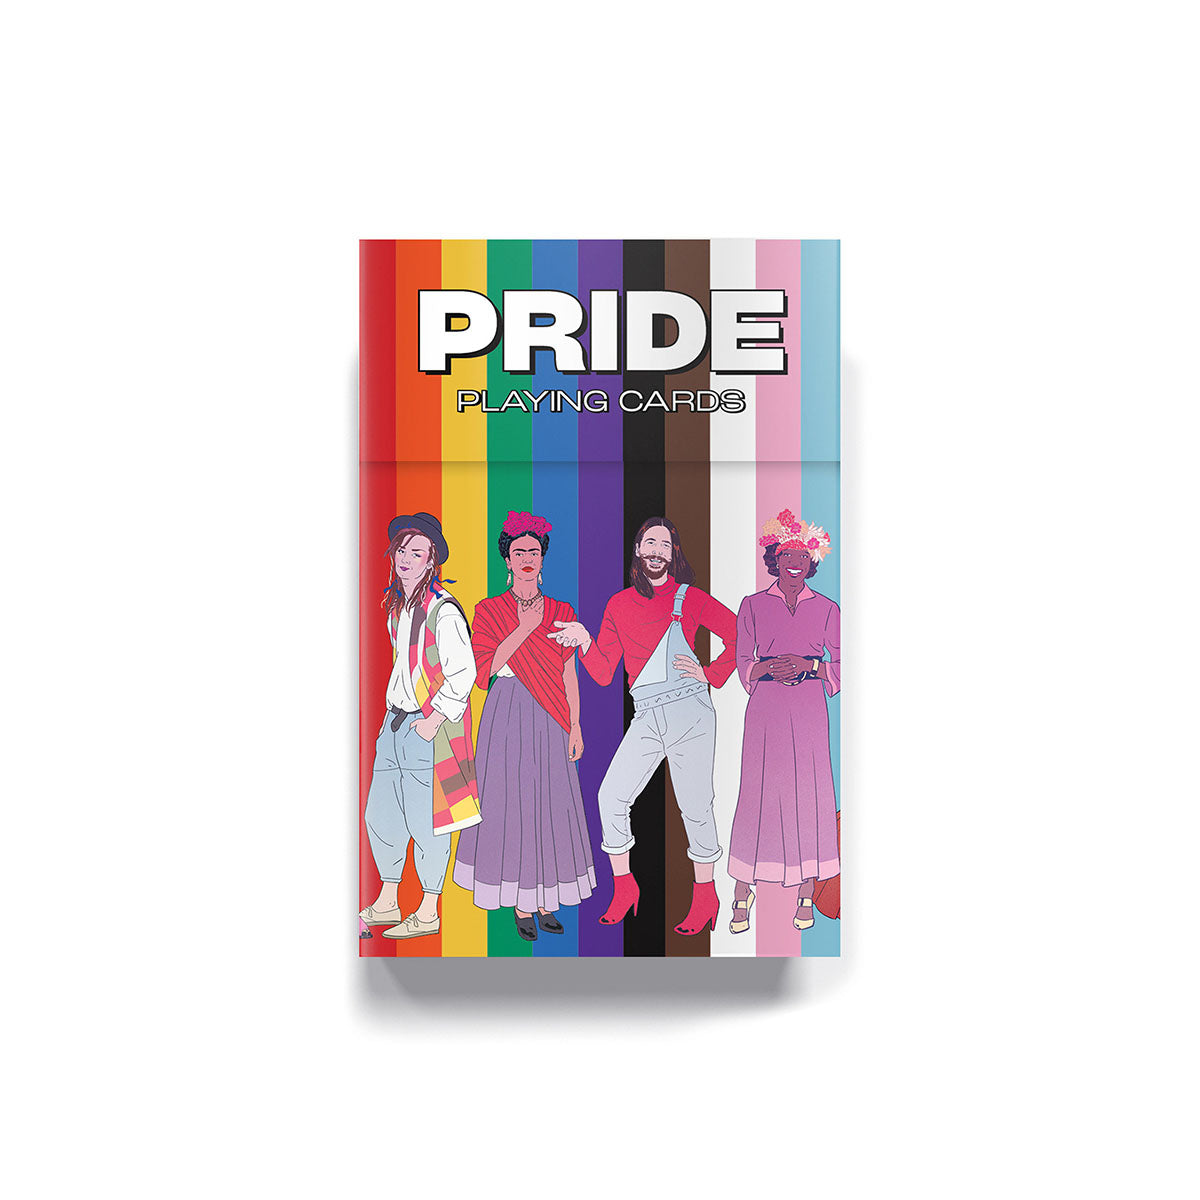 The cover of Pride Playing Cards: Icons of the LGBTQ+ Community's packaging.